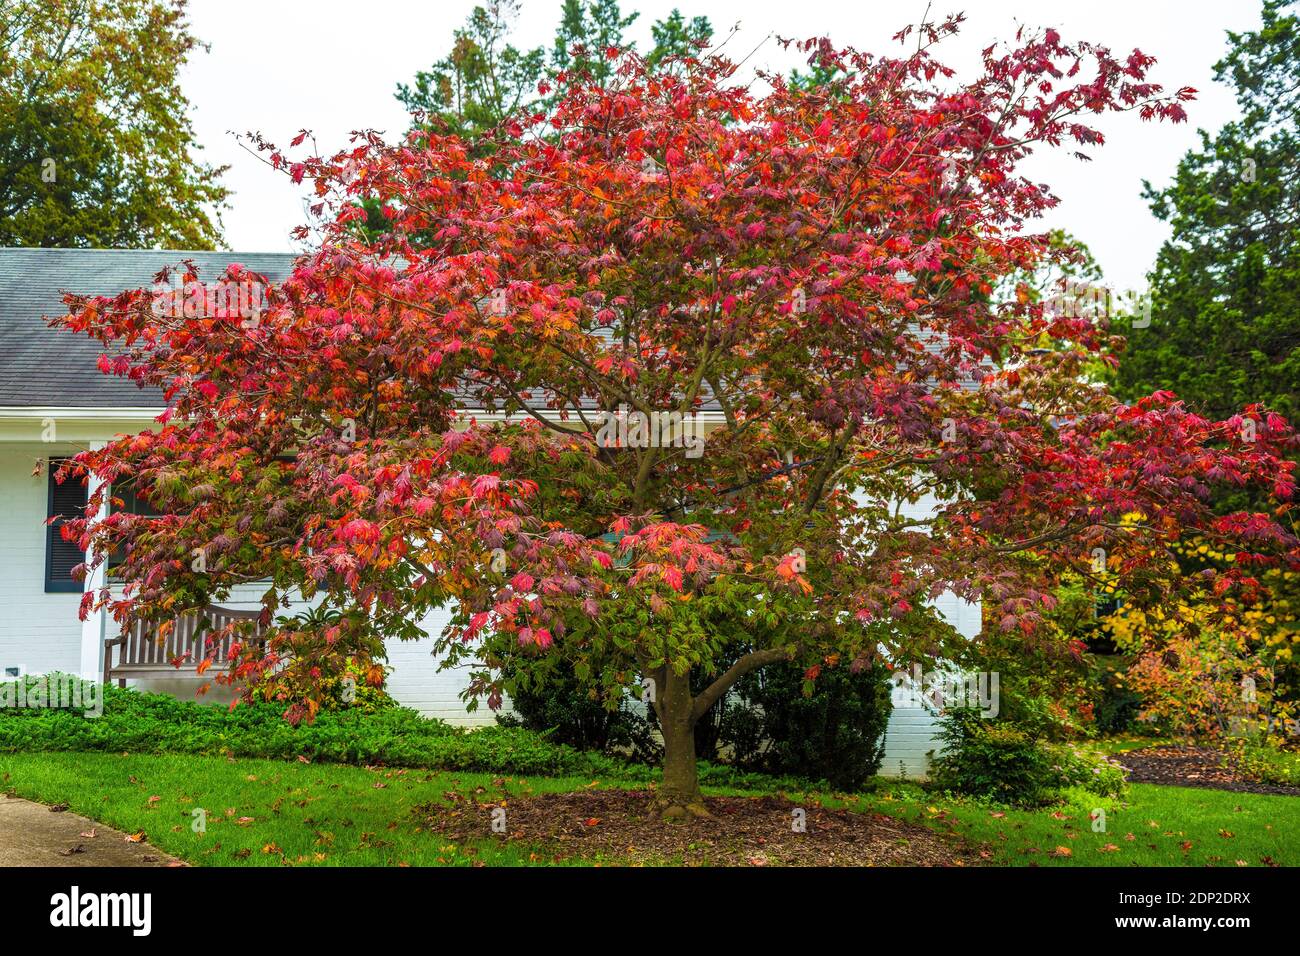 Japanese Maple in Early Fall Color, Acer Japonicum Aconiticolium (Full Moon Maple).  Alexandria, Virginia, USA Stock Photo